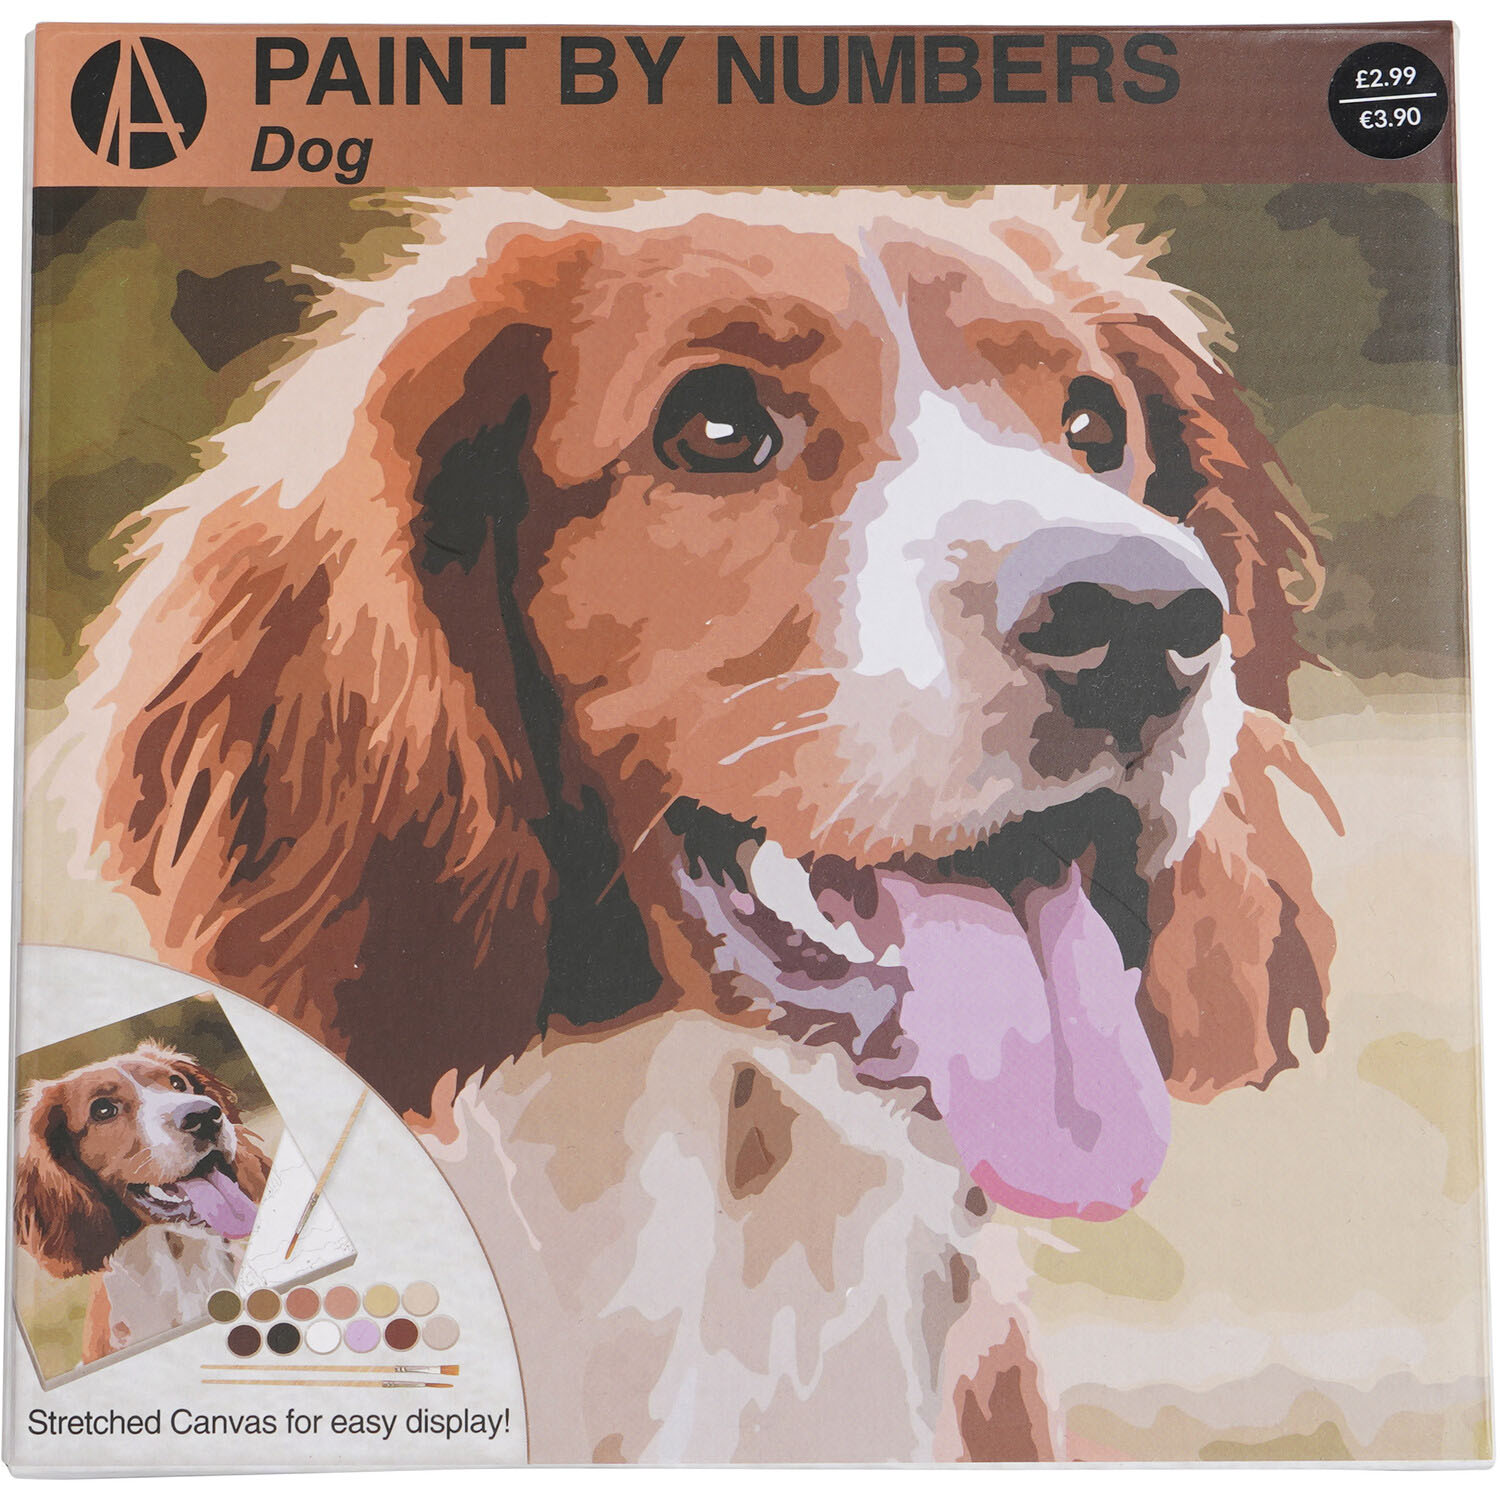 Paint by Numbers Cat or Dog Image 4